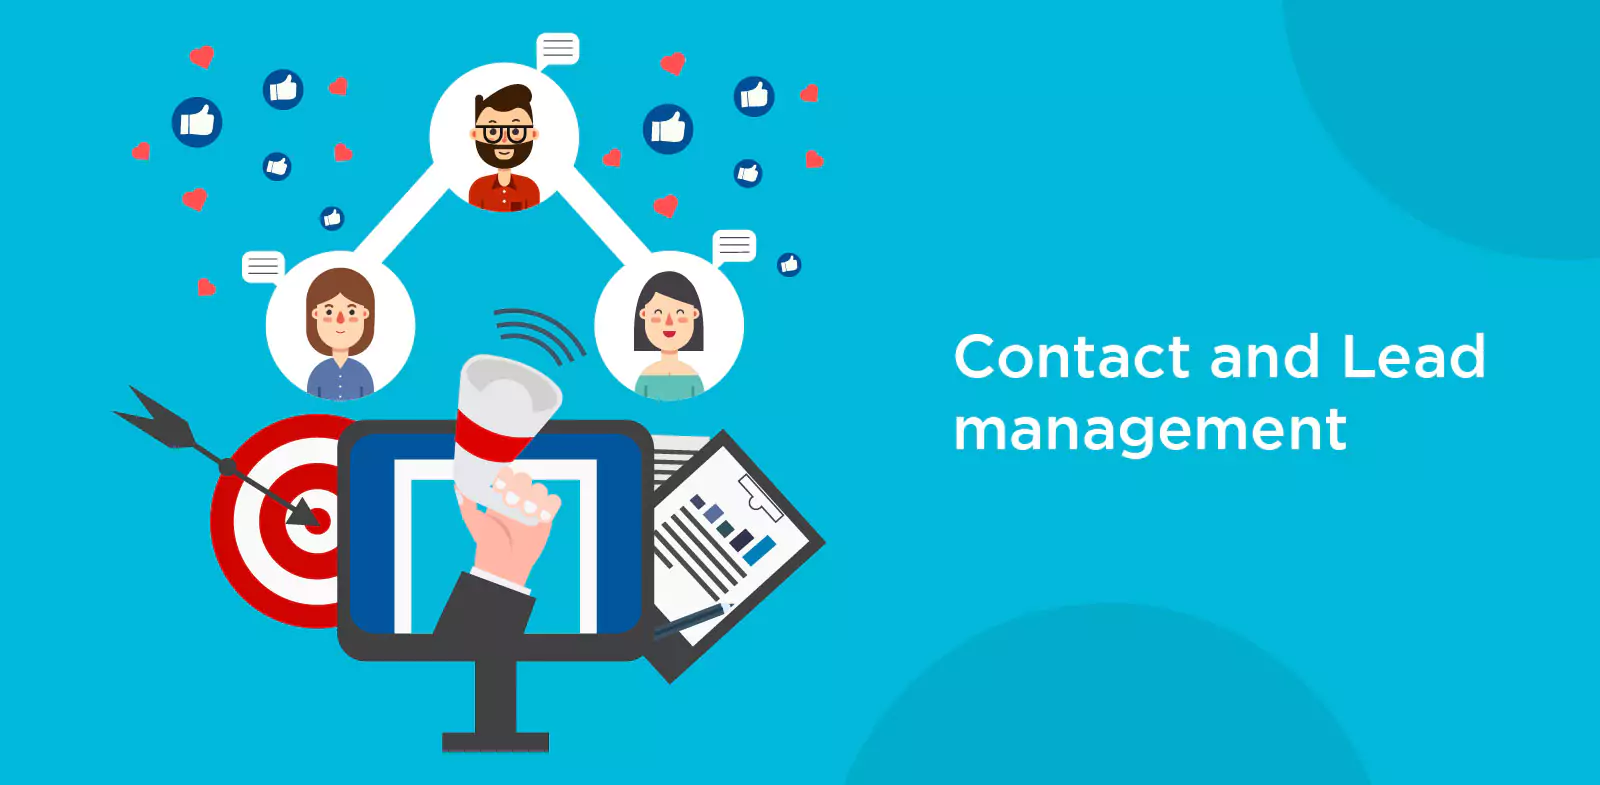 Contact and lead management